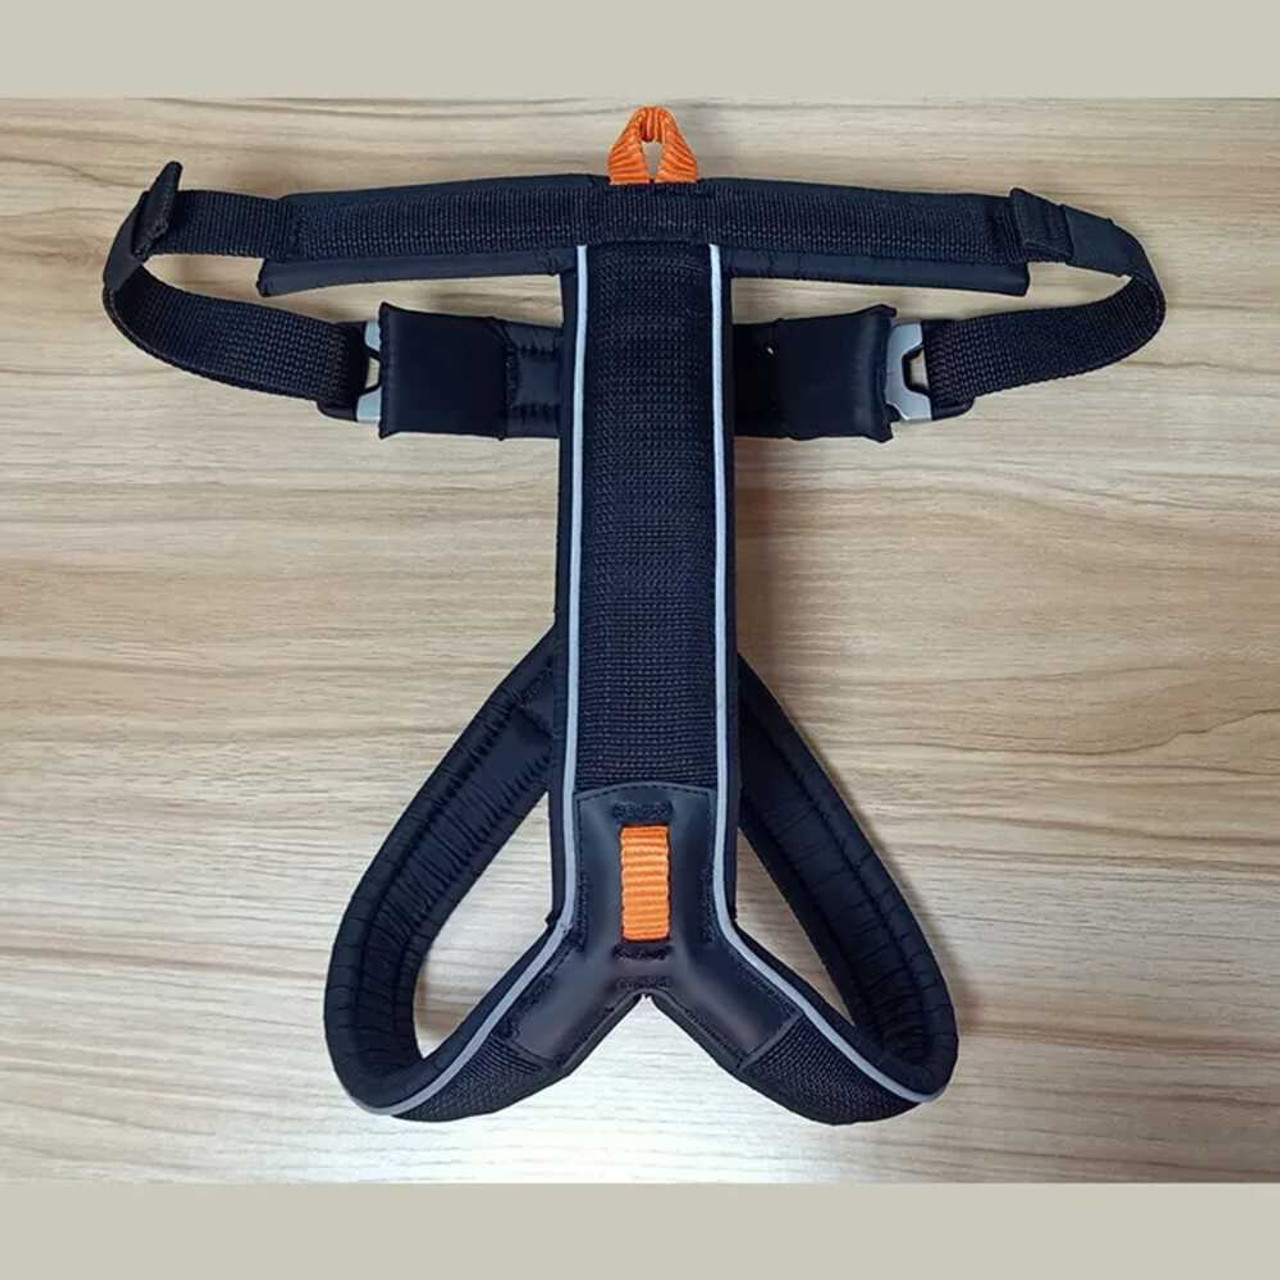 Strong Fit K9 Wear Dog Harness All Black